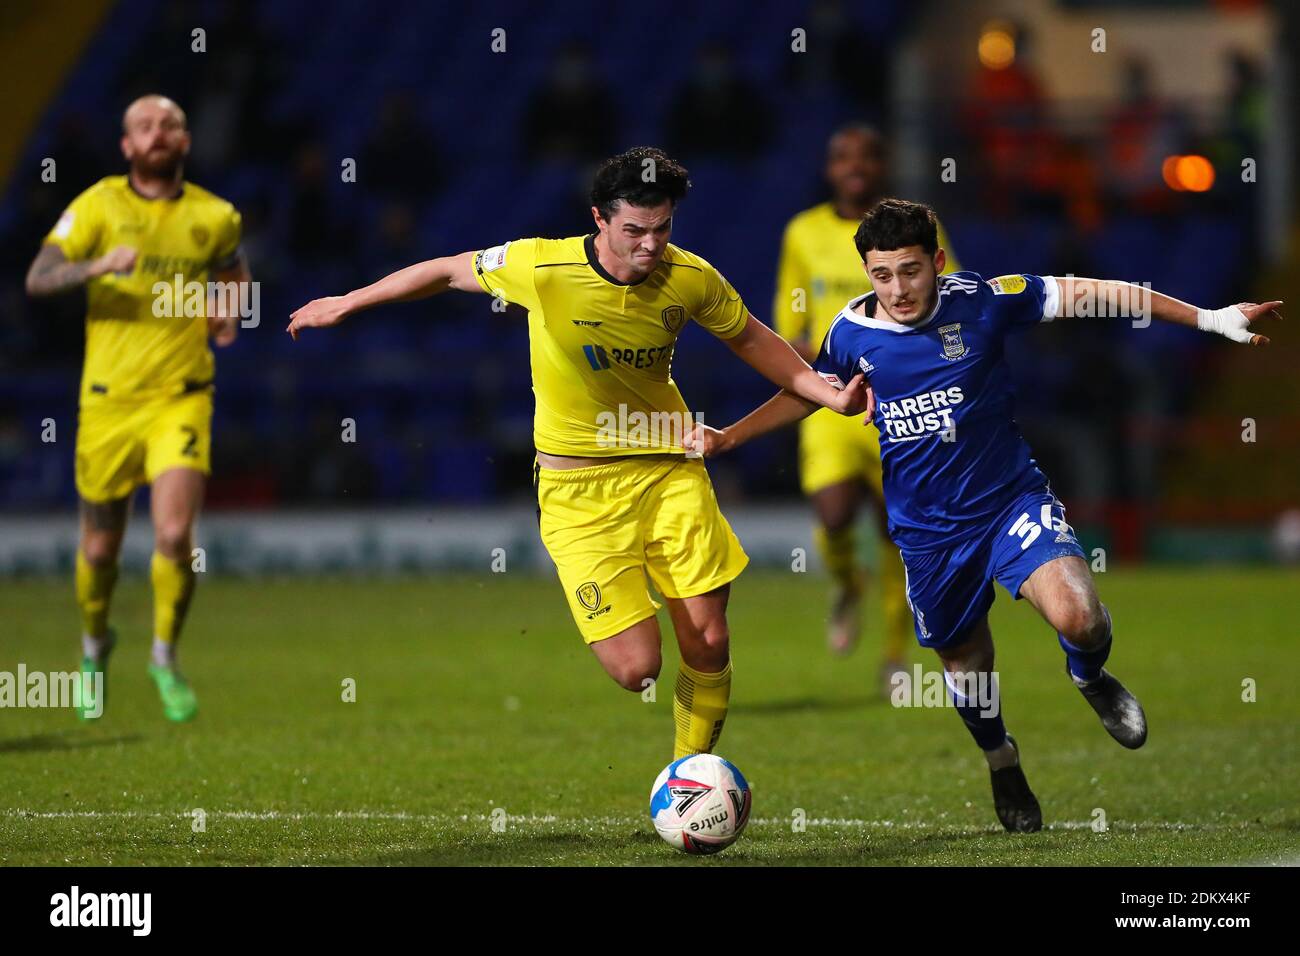 Armando Dobra of Ipswich Town and Joe Powell of Burton Albion - Ipswich Town v Burton Albion, Sky Bet League One, Portman Road, Ipswich, UK - 15th December 2020  Editorial Use Only - DataCo restrictions apply Stock Photo